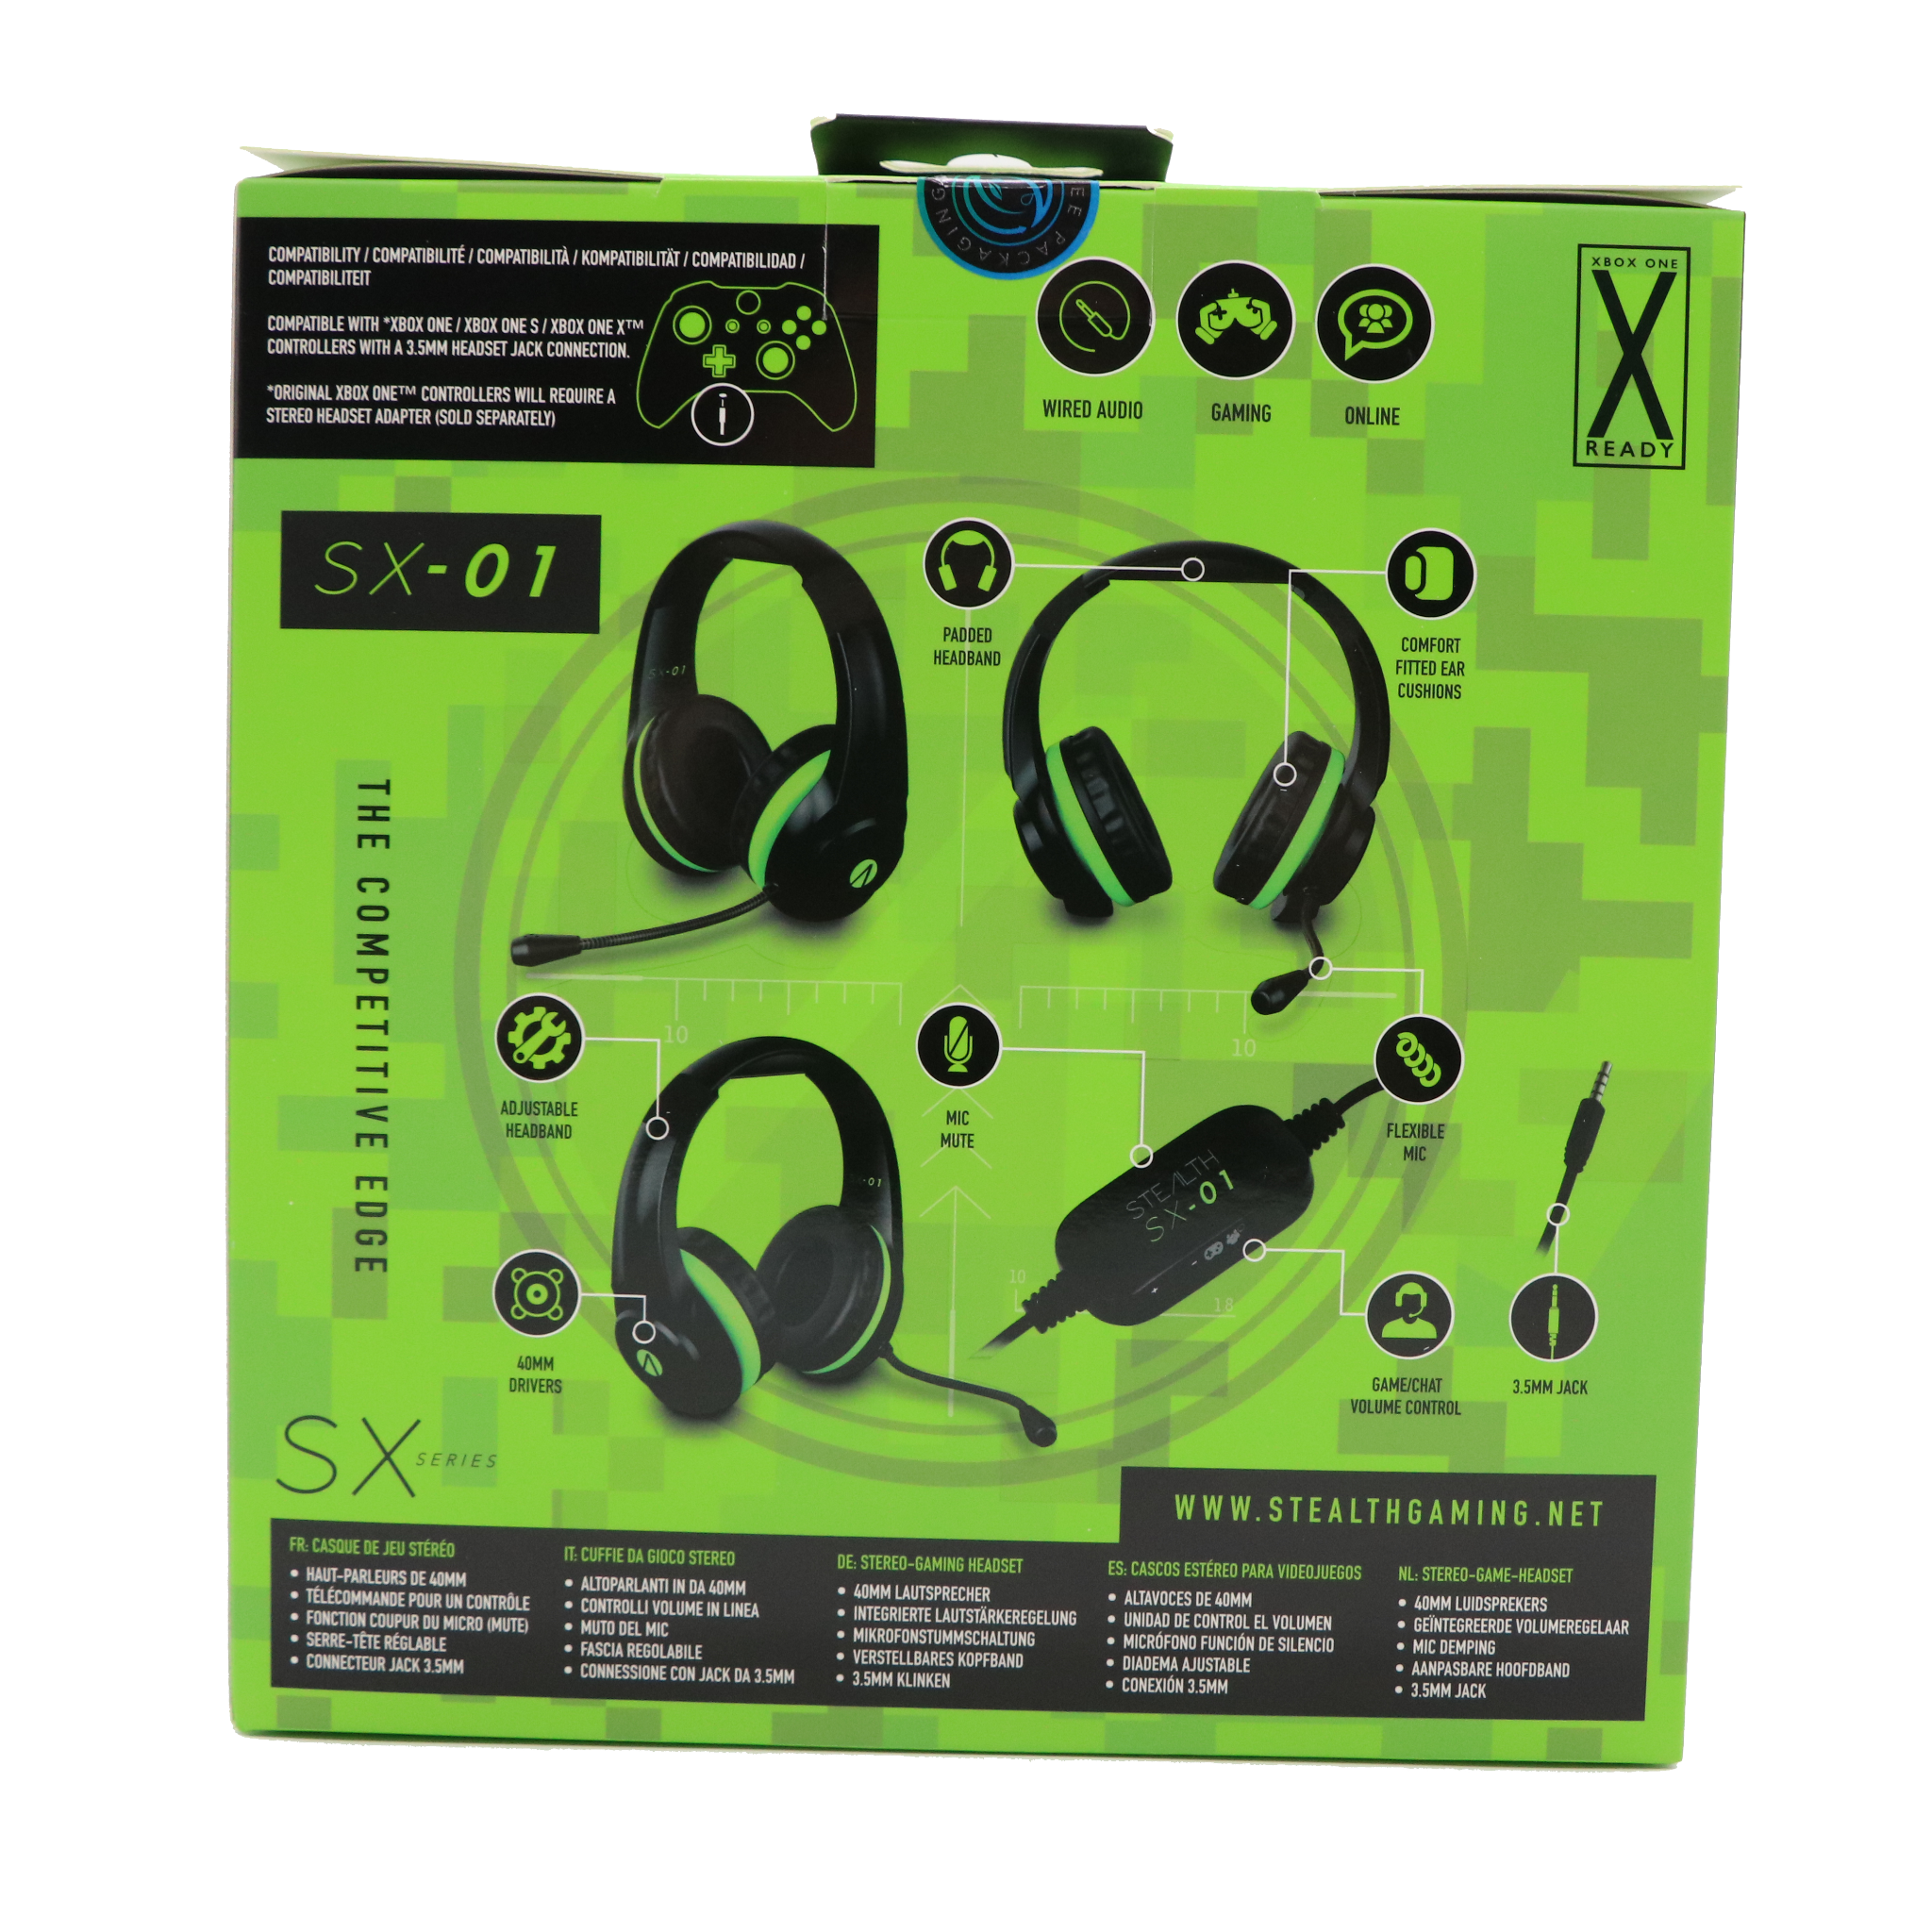 Stealth Xbox Wired P – Gaming InSpireVideoGames For One/S/X Stereo Headset SX-01 Microsoft